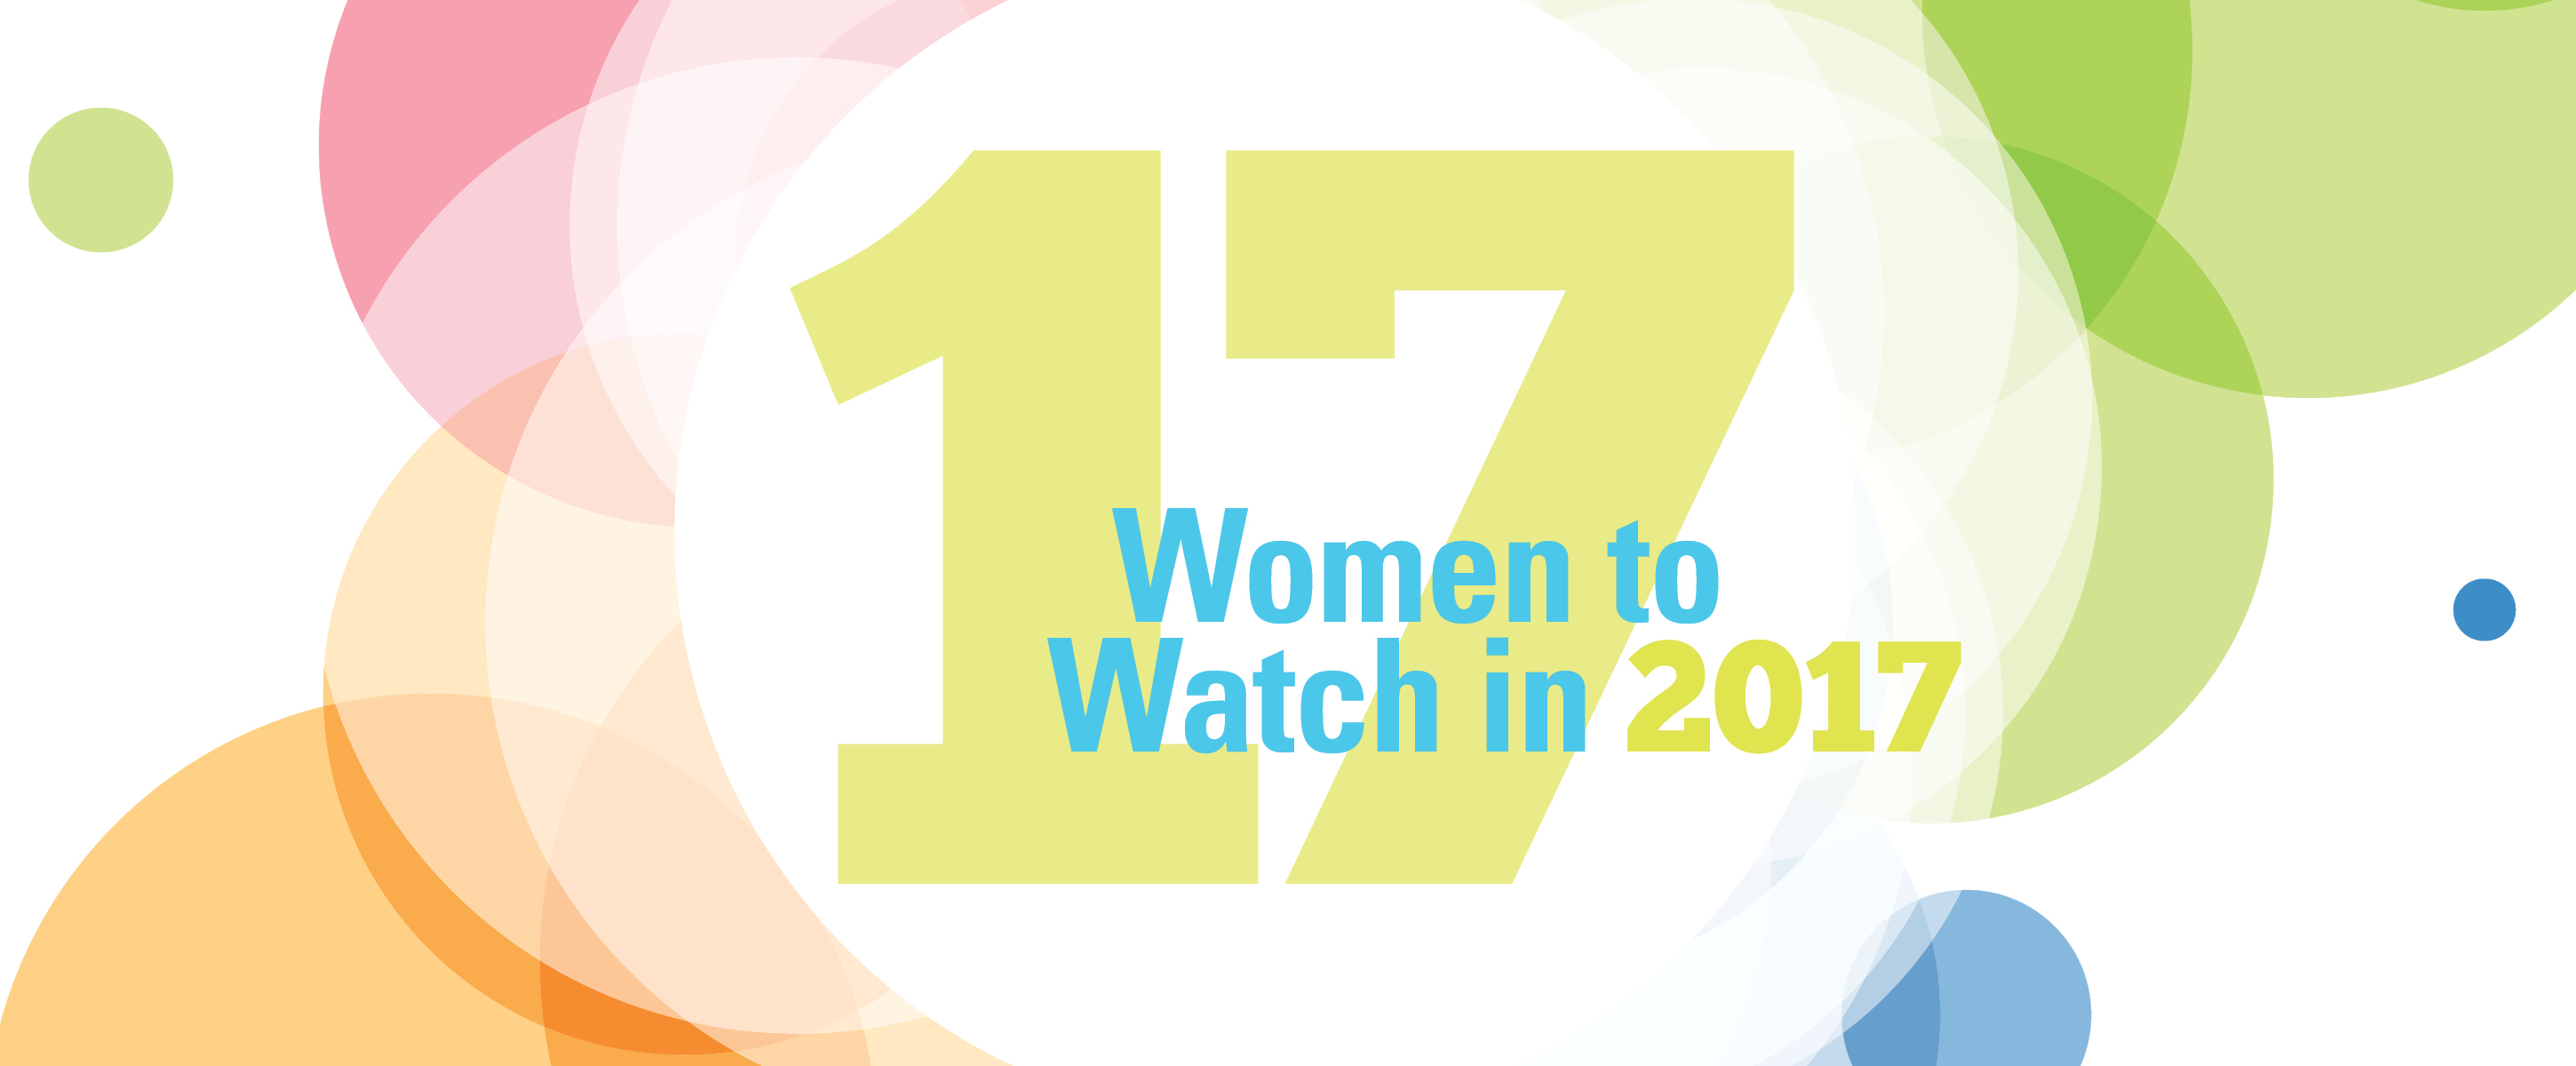 Overlapping circles of different colours with '17 Women to Watch in 2017' written in the middle 